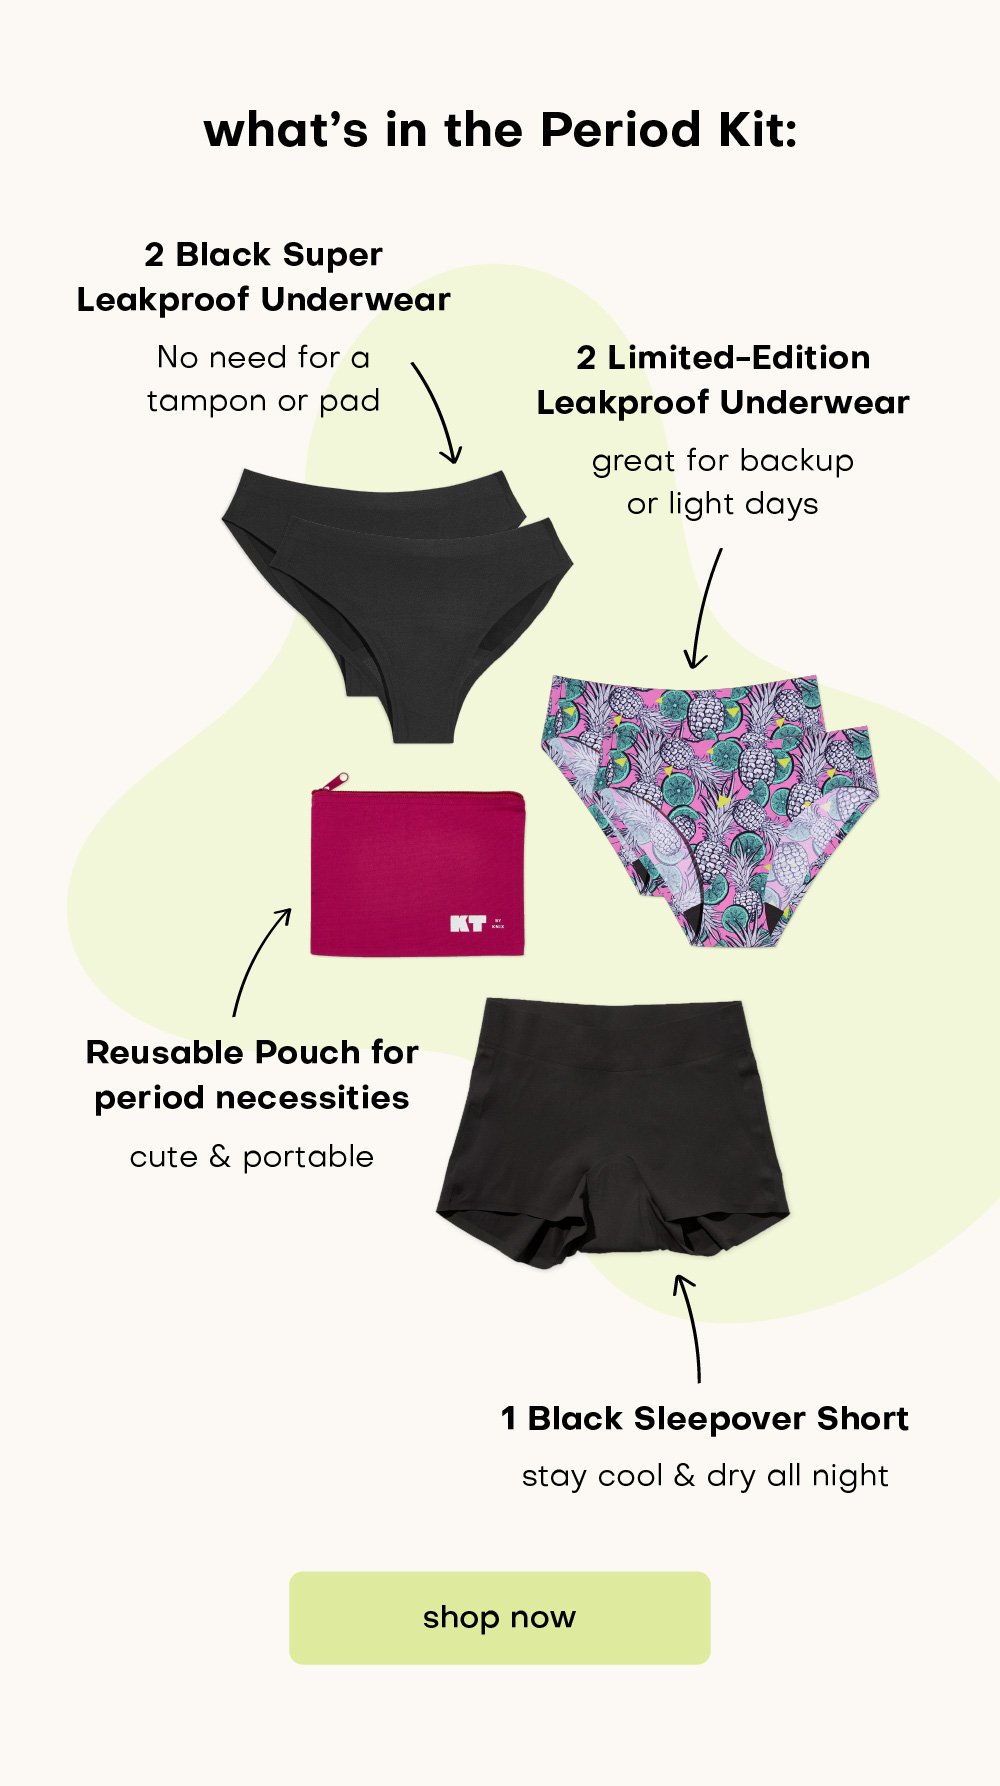 Kt by Knix: get set for summer travel with the Period Kit